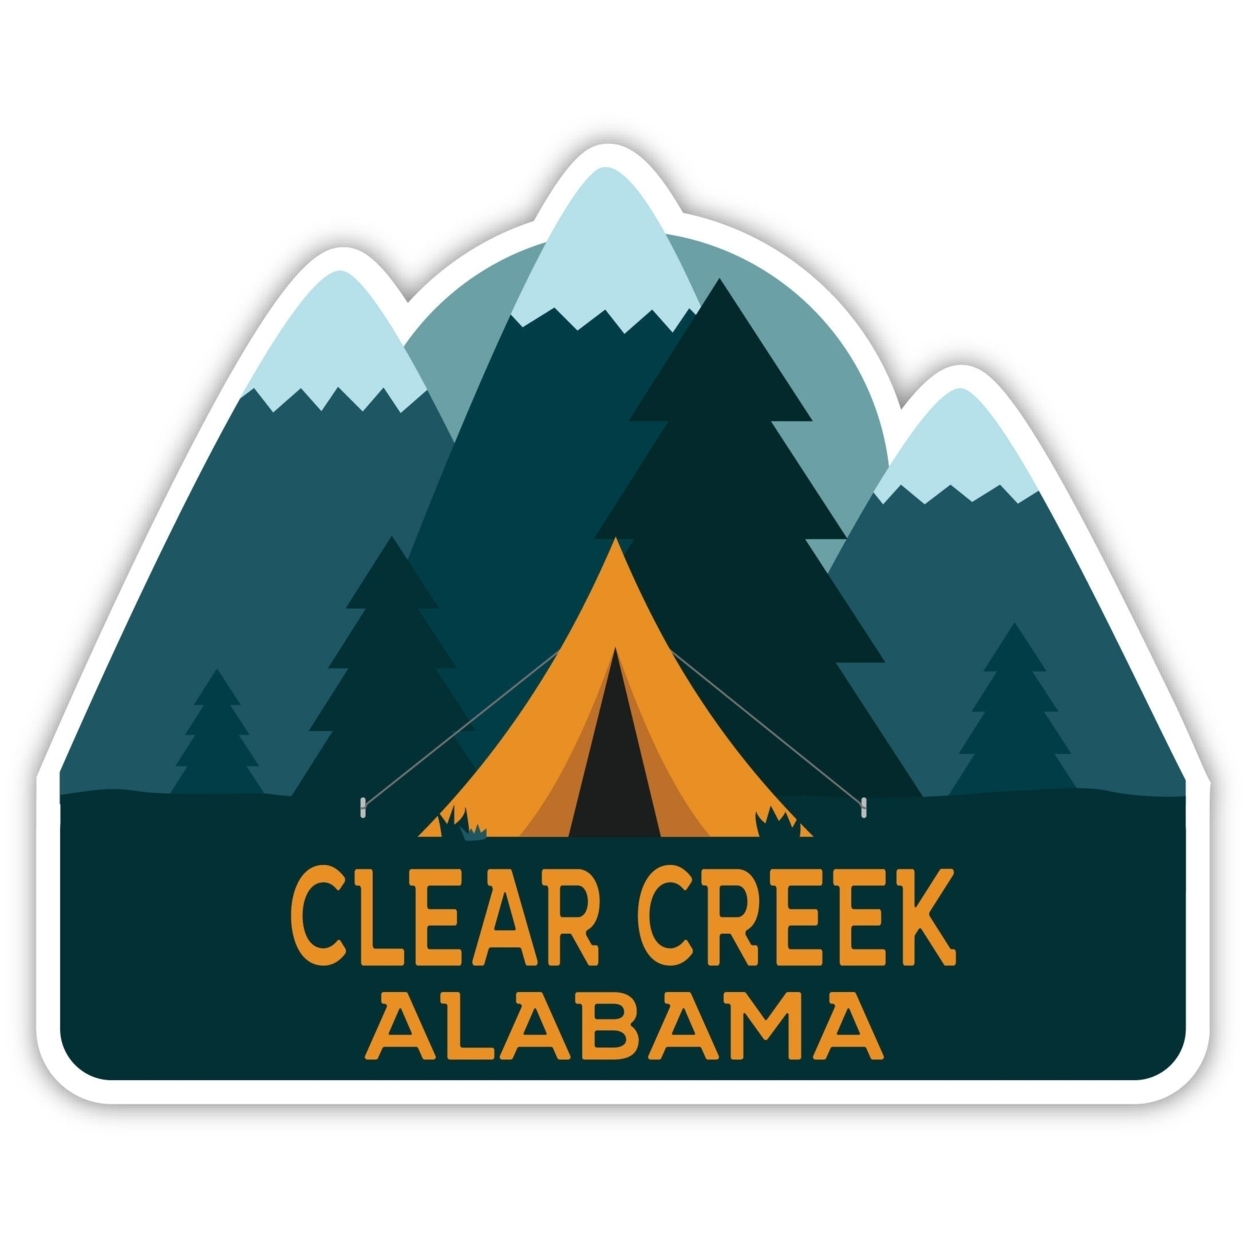 Clear Creek Alabama Souvenir Decorative Stickers (Choose Theme And Size) - 4-Pack, 10-Inch, Tent